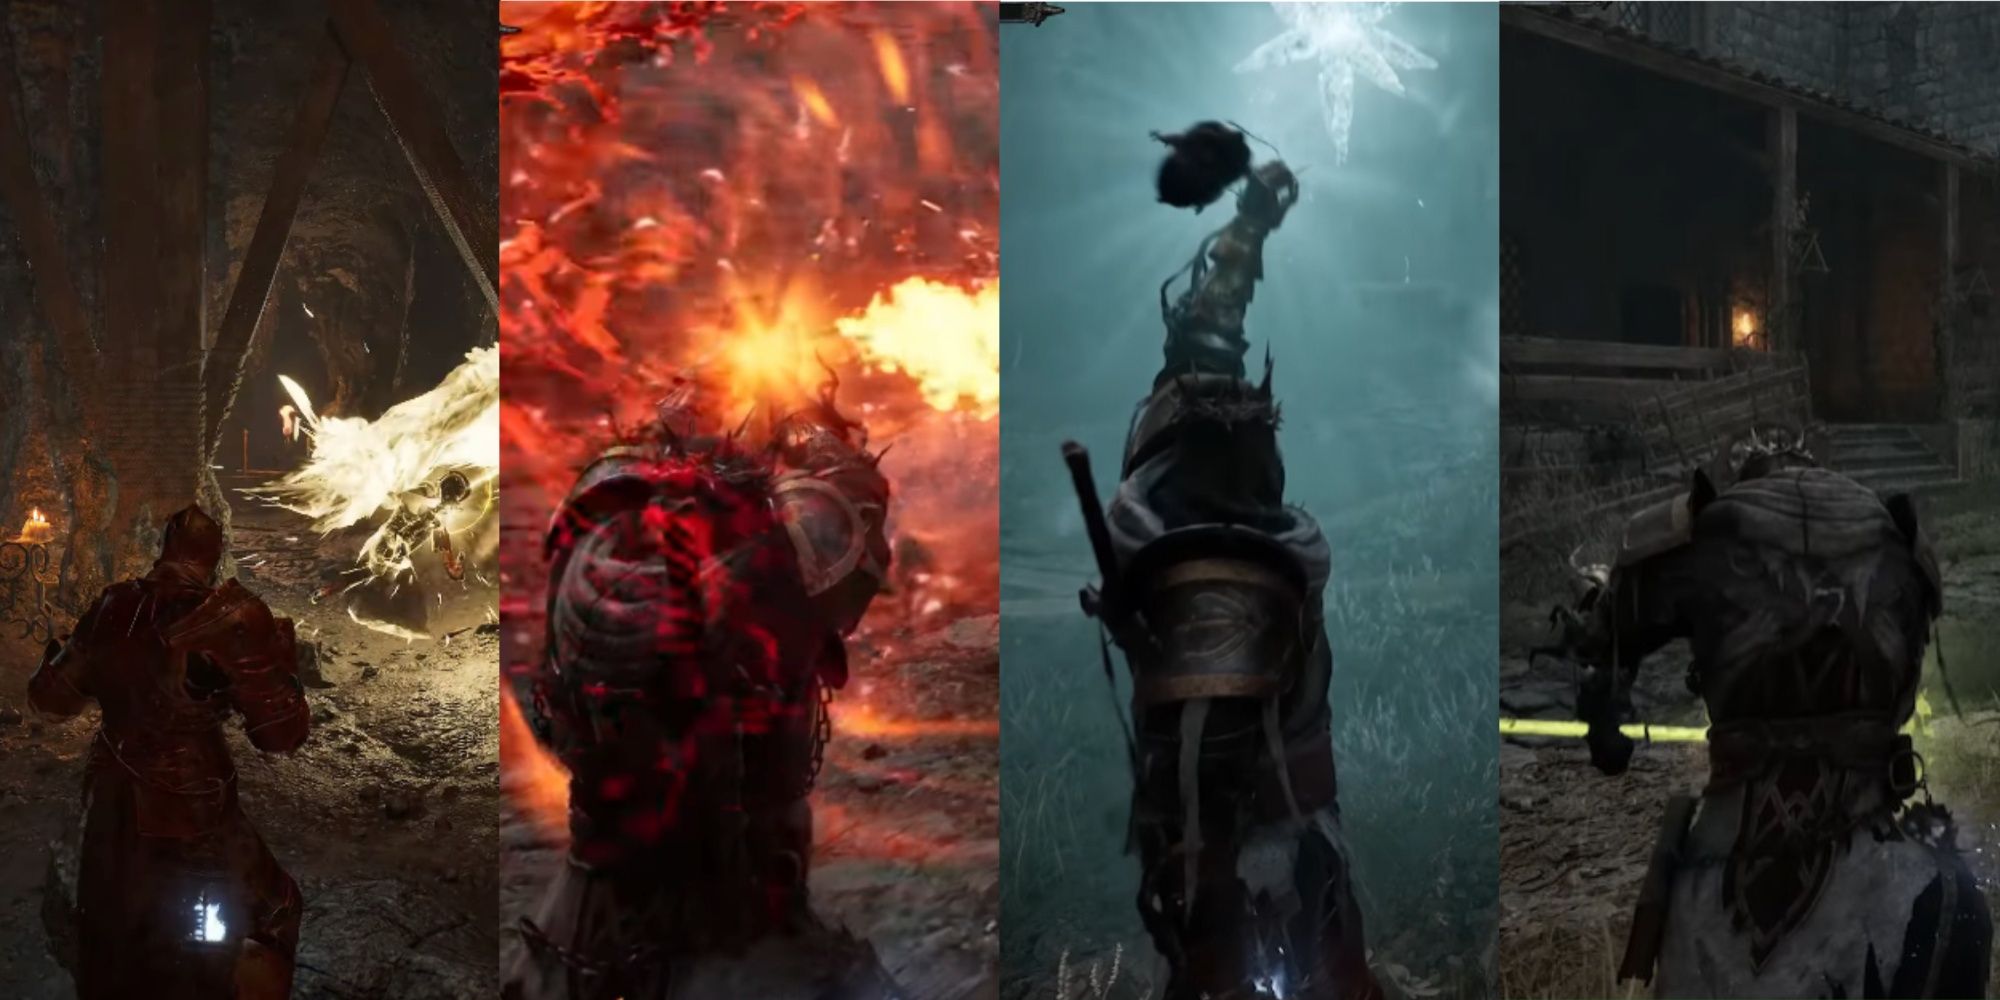 Harkyn using different spells in Lords of the Fallen